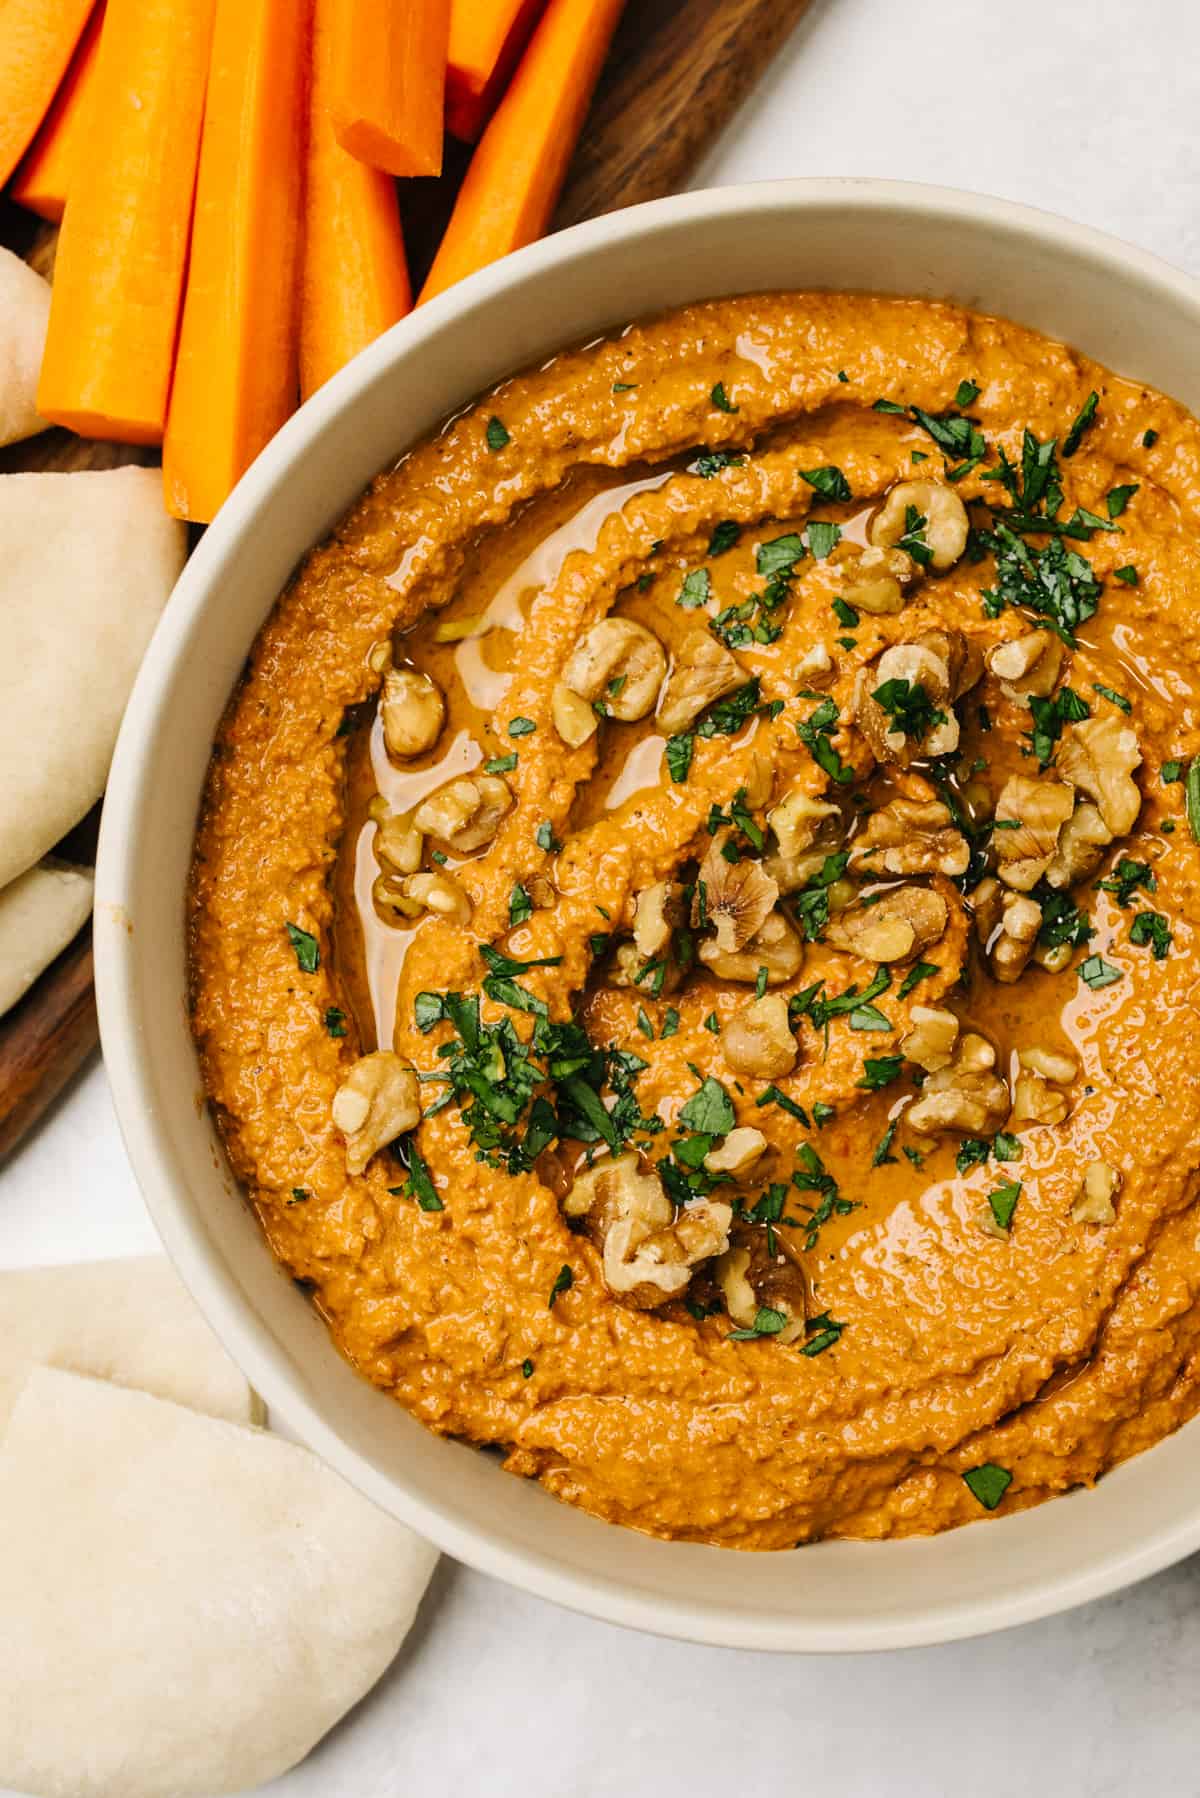 Muhammara dip in a low tan bowl, surrounded by pita bread and sliced raw carrots.